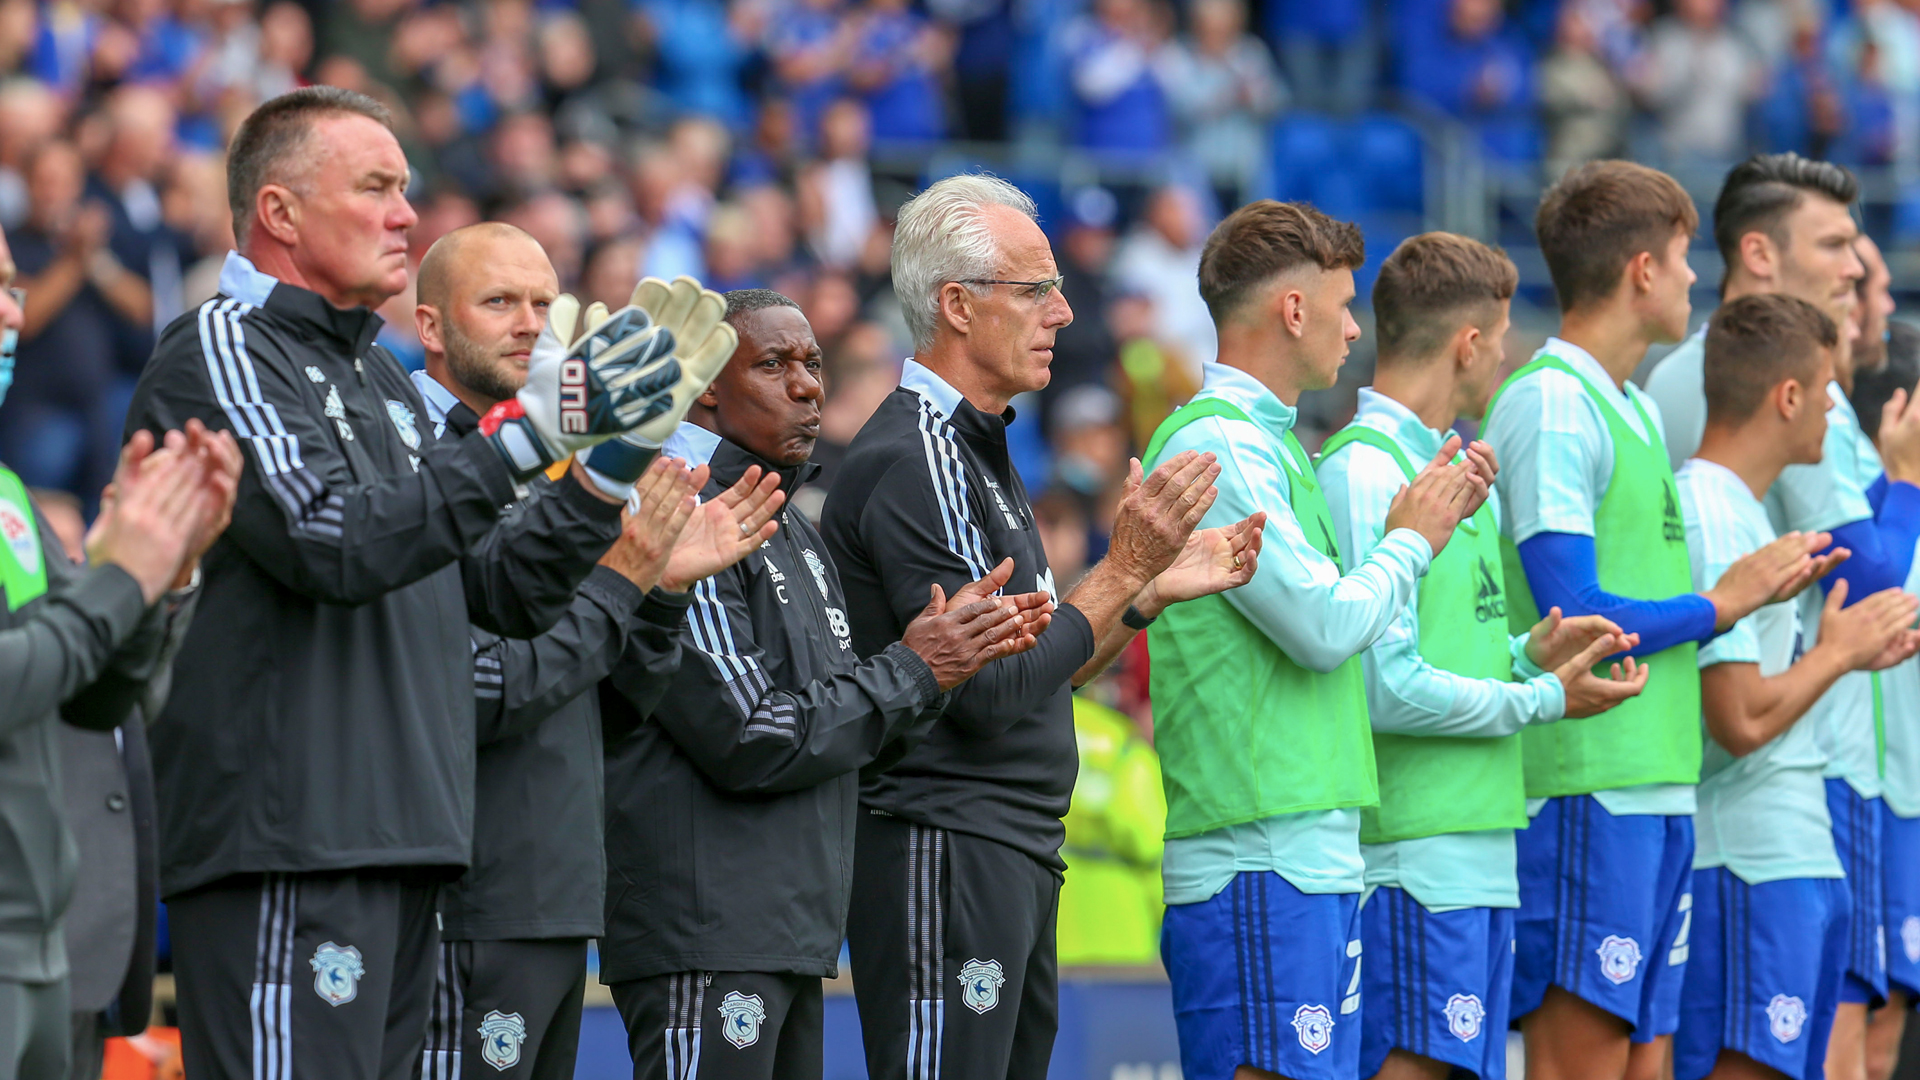 The City boss, staff and players applaud at CCS...